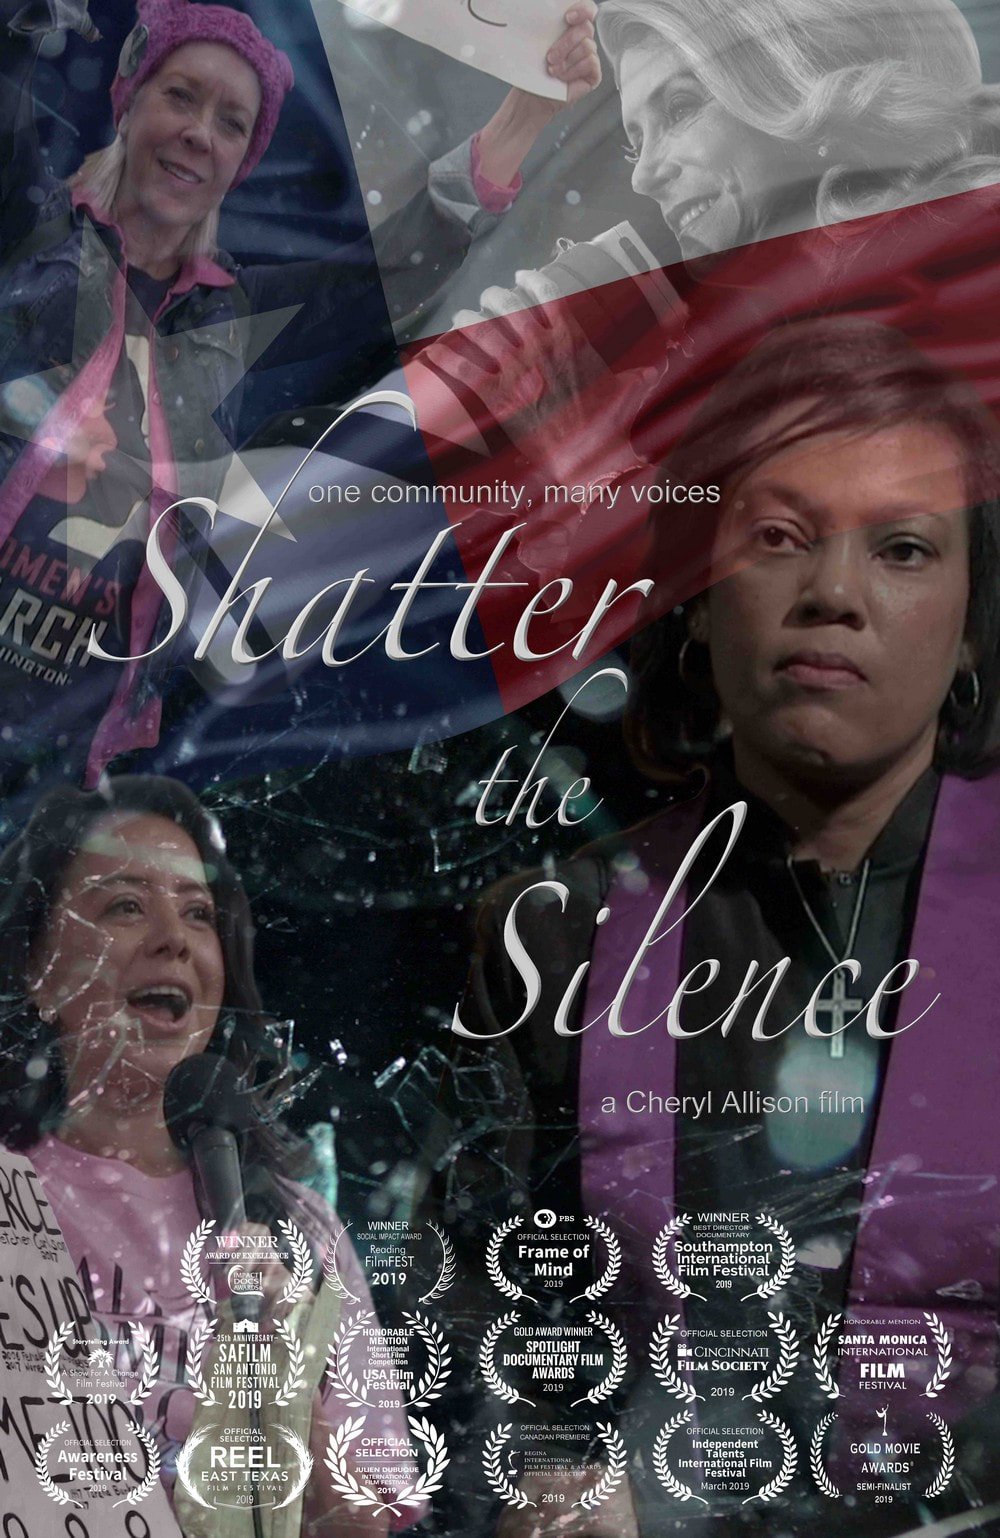 Shatter the Silence poster.